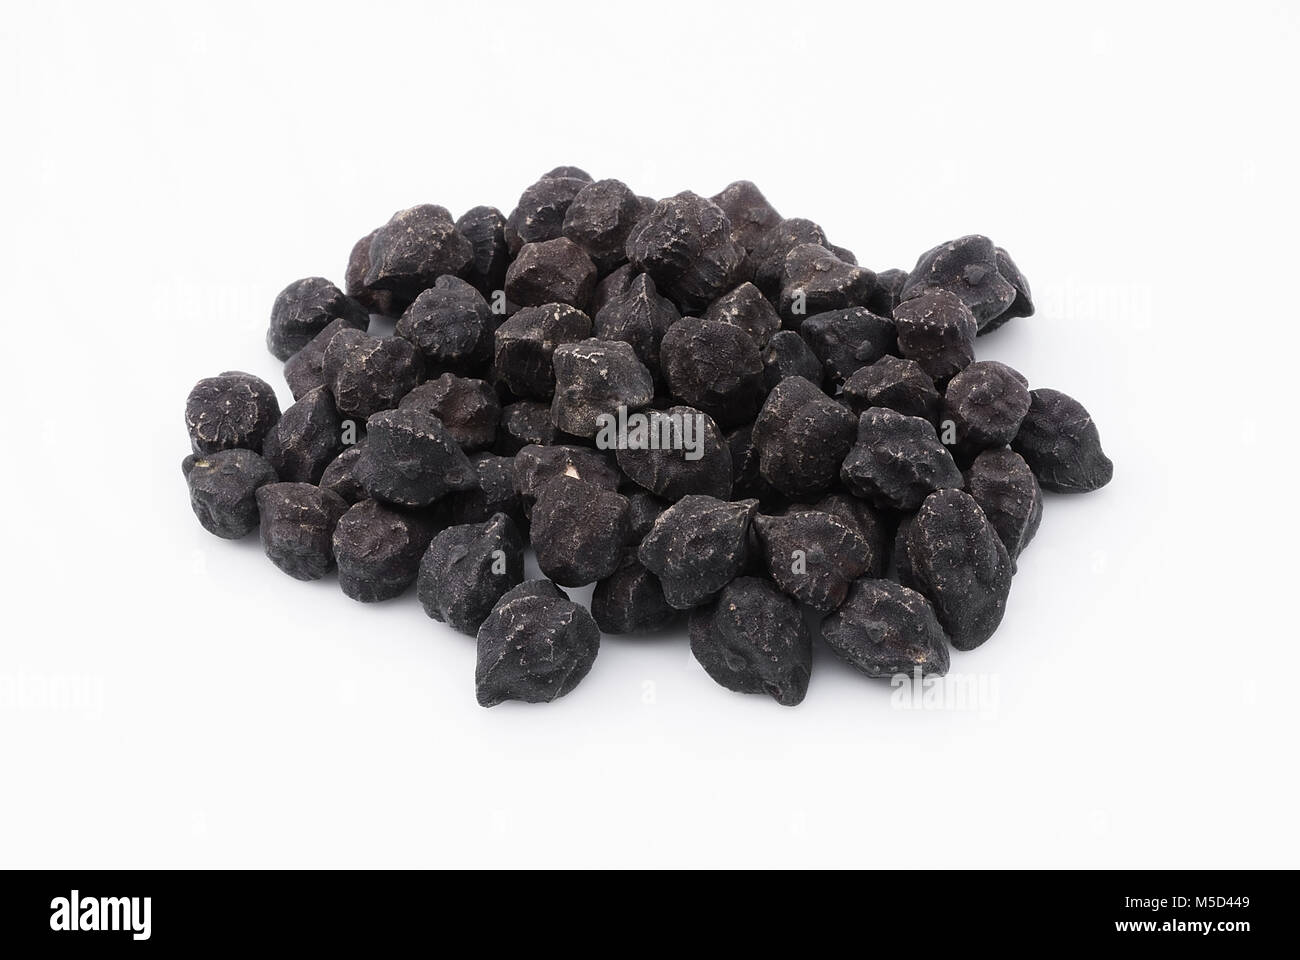 Black chickpea Murgia (cece nero), also known by the name of 'cece del solco dritto' from the Puglia (Italy). subject isolated on white background Stock Photo